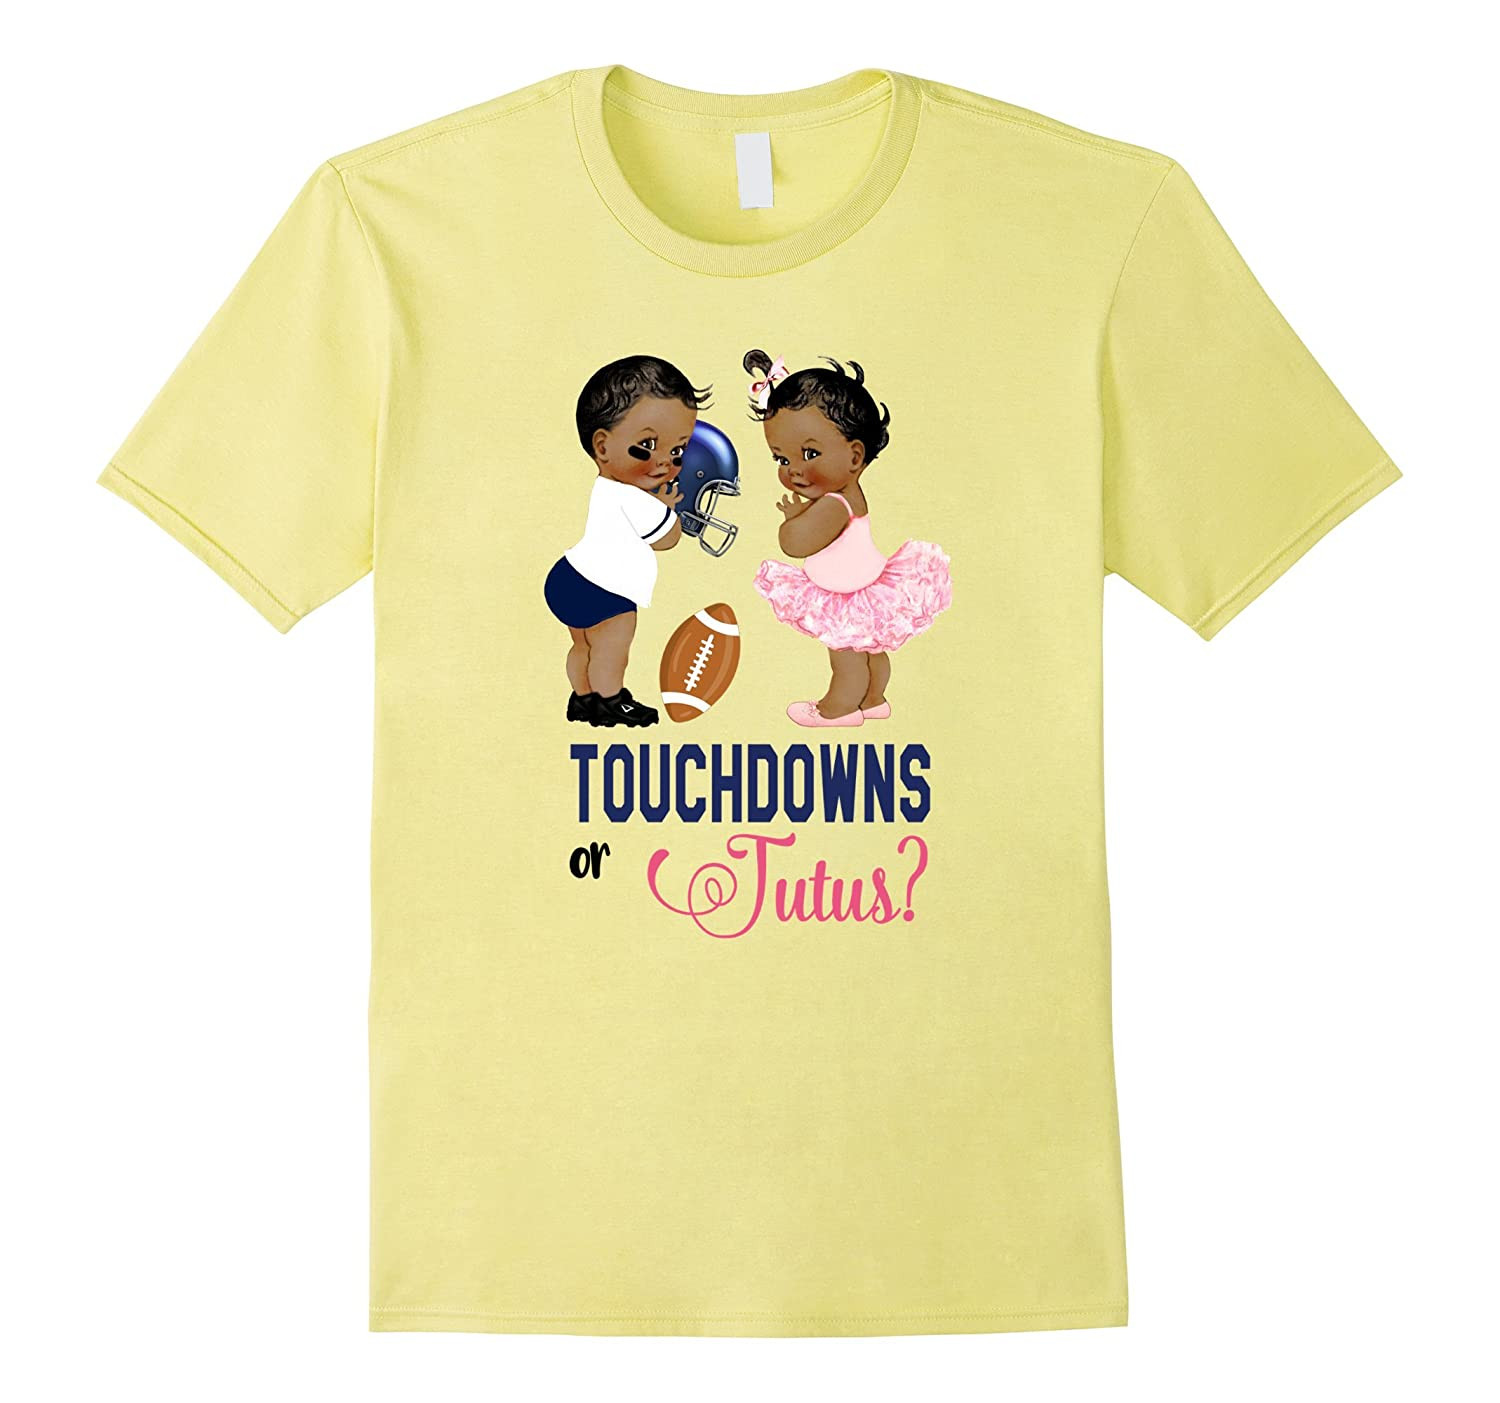 Gender Reveal Party Shirt Ideas
 Ethnic Touchdowns or Tutus Gender Reveal Party T Shirt ANZ